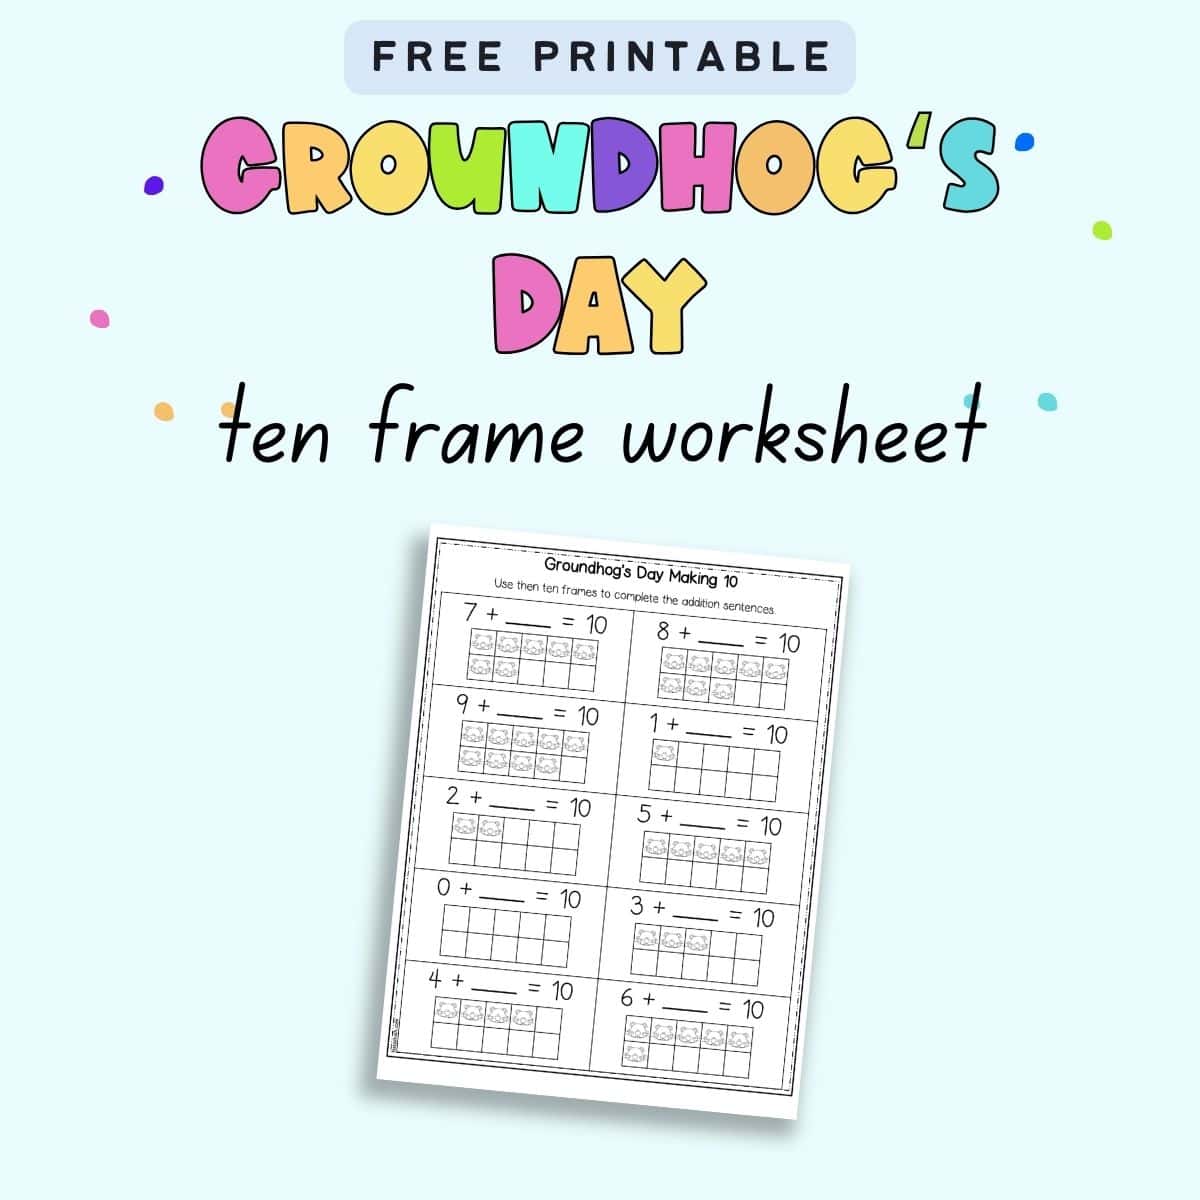 Text overlay "Free printable Groundhog's Day ten frame worksheet" with a preview of a making 10 worksheet